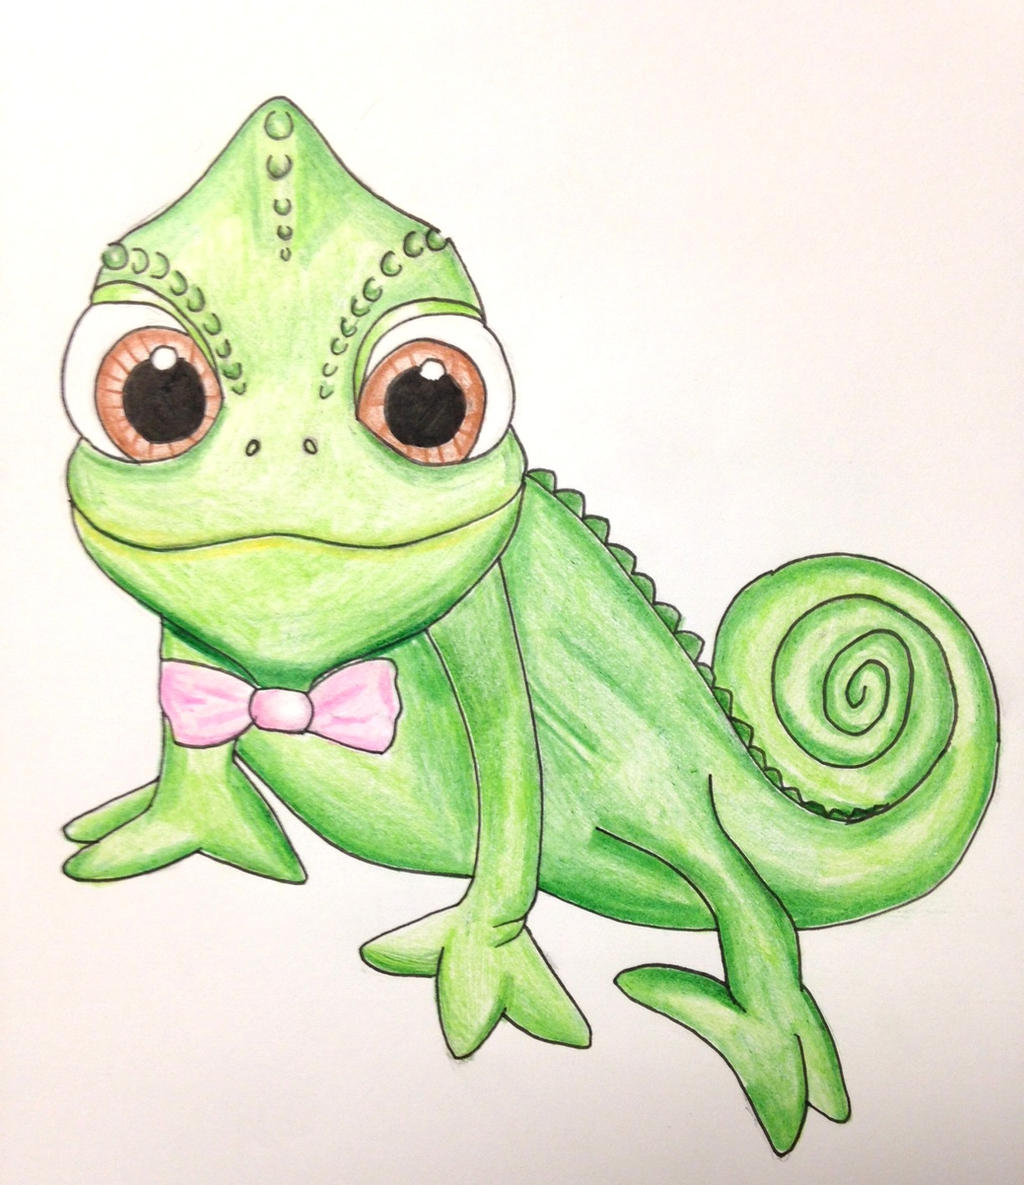 Pascal Tangled by eraport6 on DeviantArt